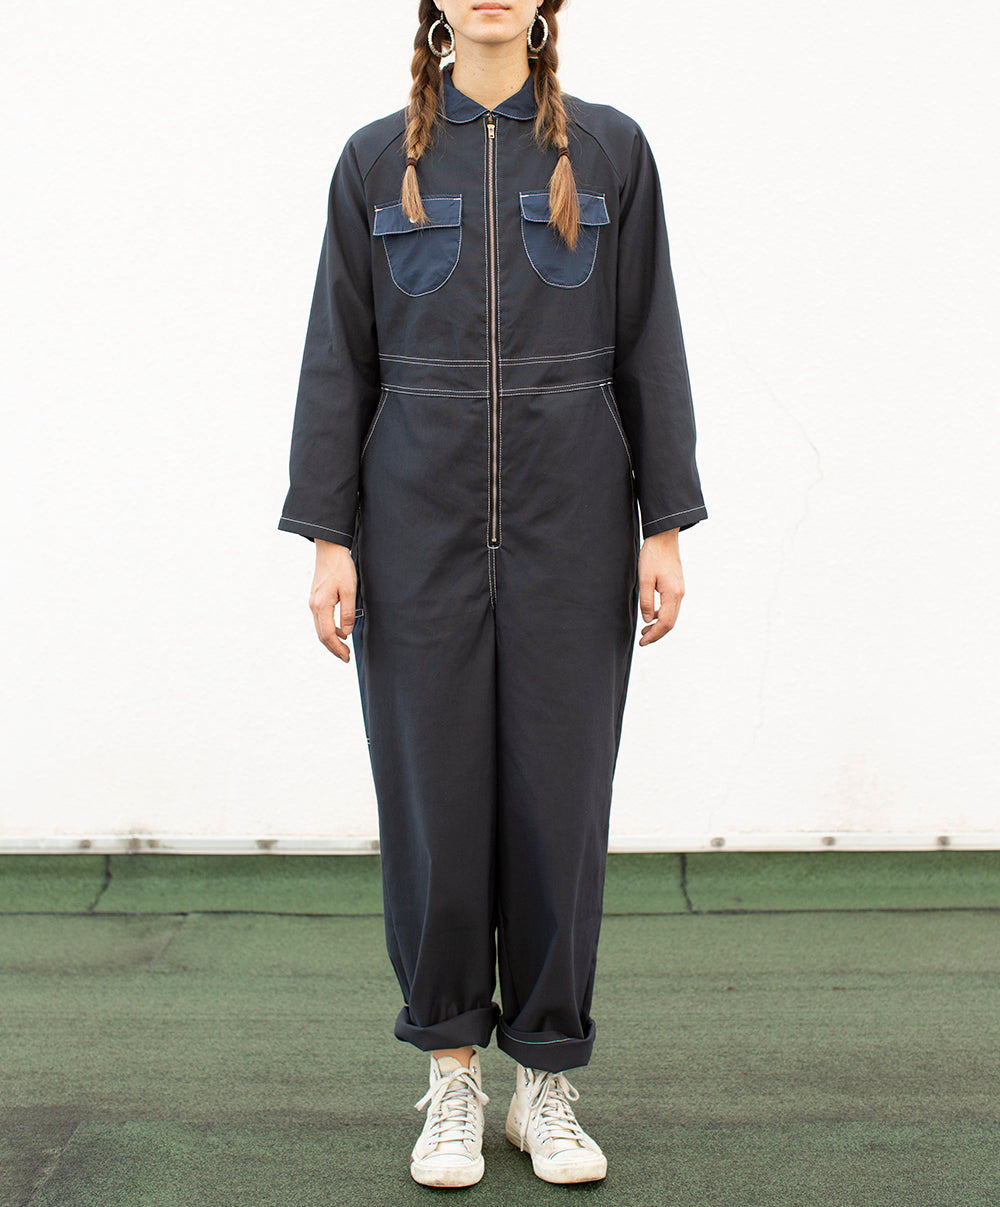 W'menswear - Launch Coverall - Navy - Space Camp